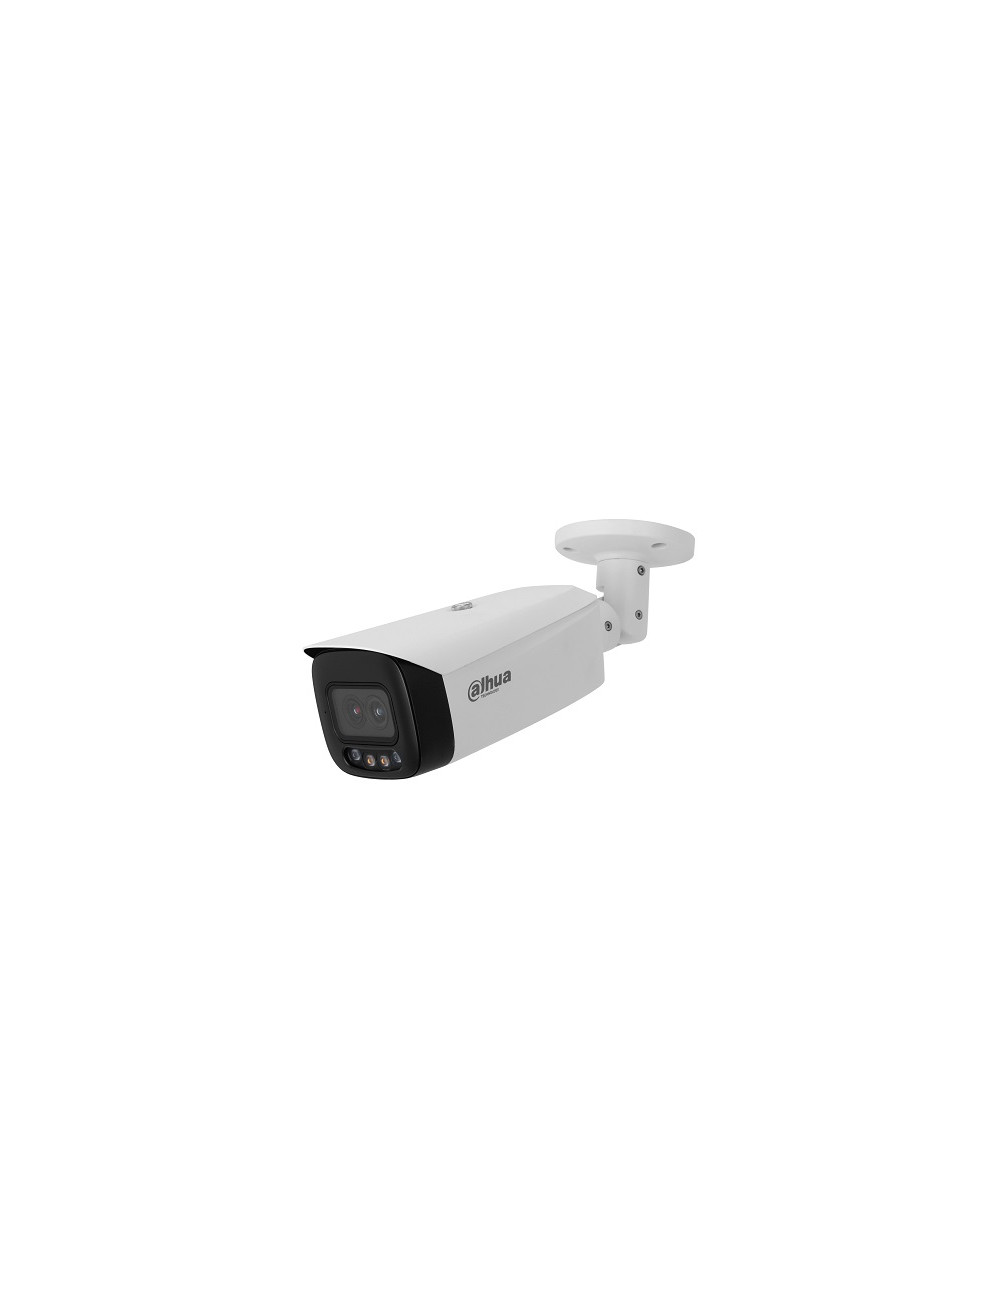 IP network camera 4MP HFW5449T1-ASE-D2 2.8mm